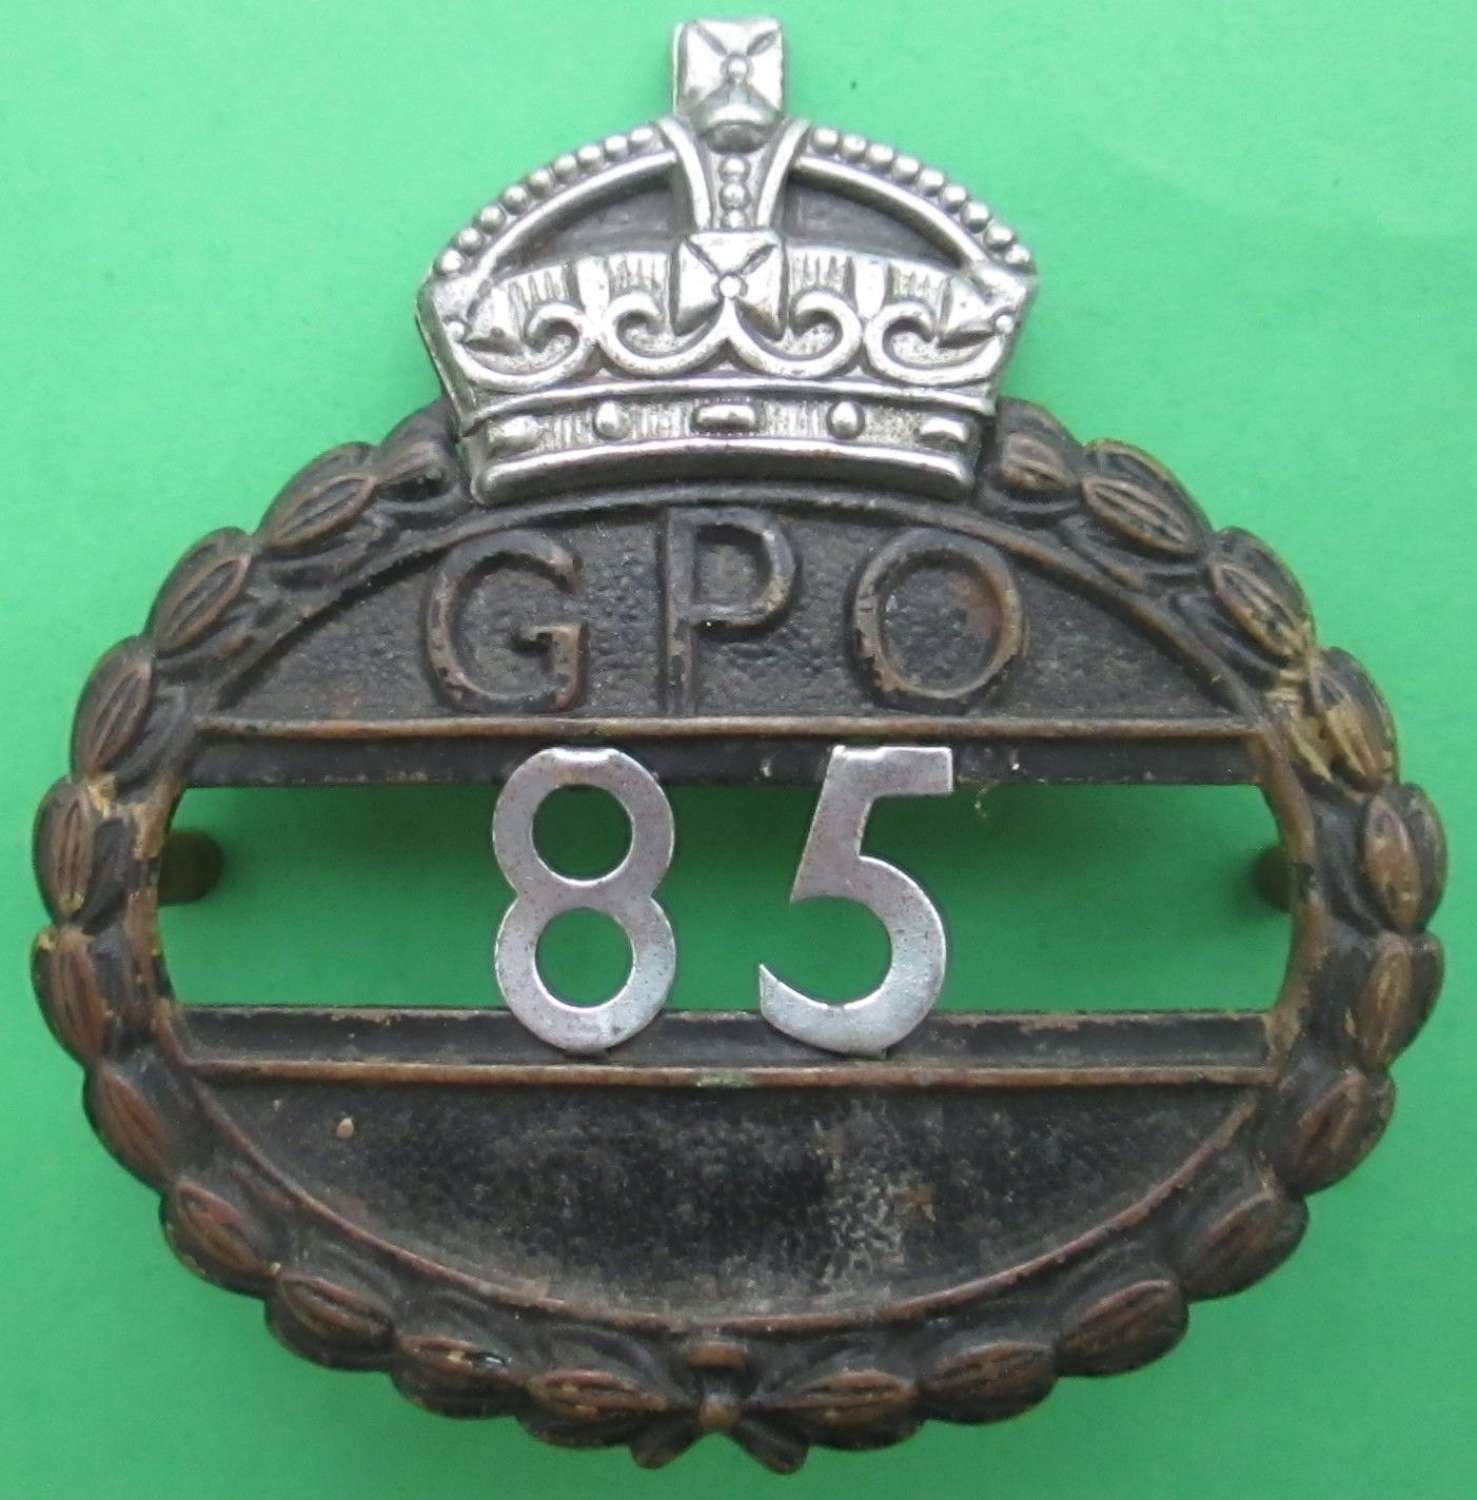 A WWII PERIOD GPO ( GENERAL POST OFFICE ) WORKERS BADGE